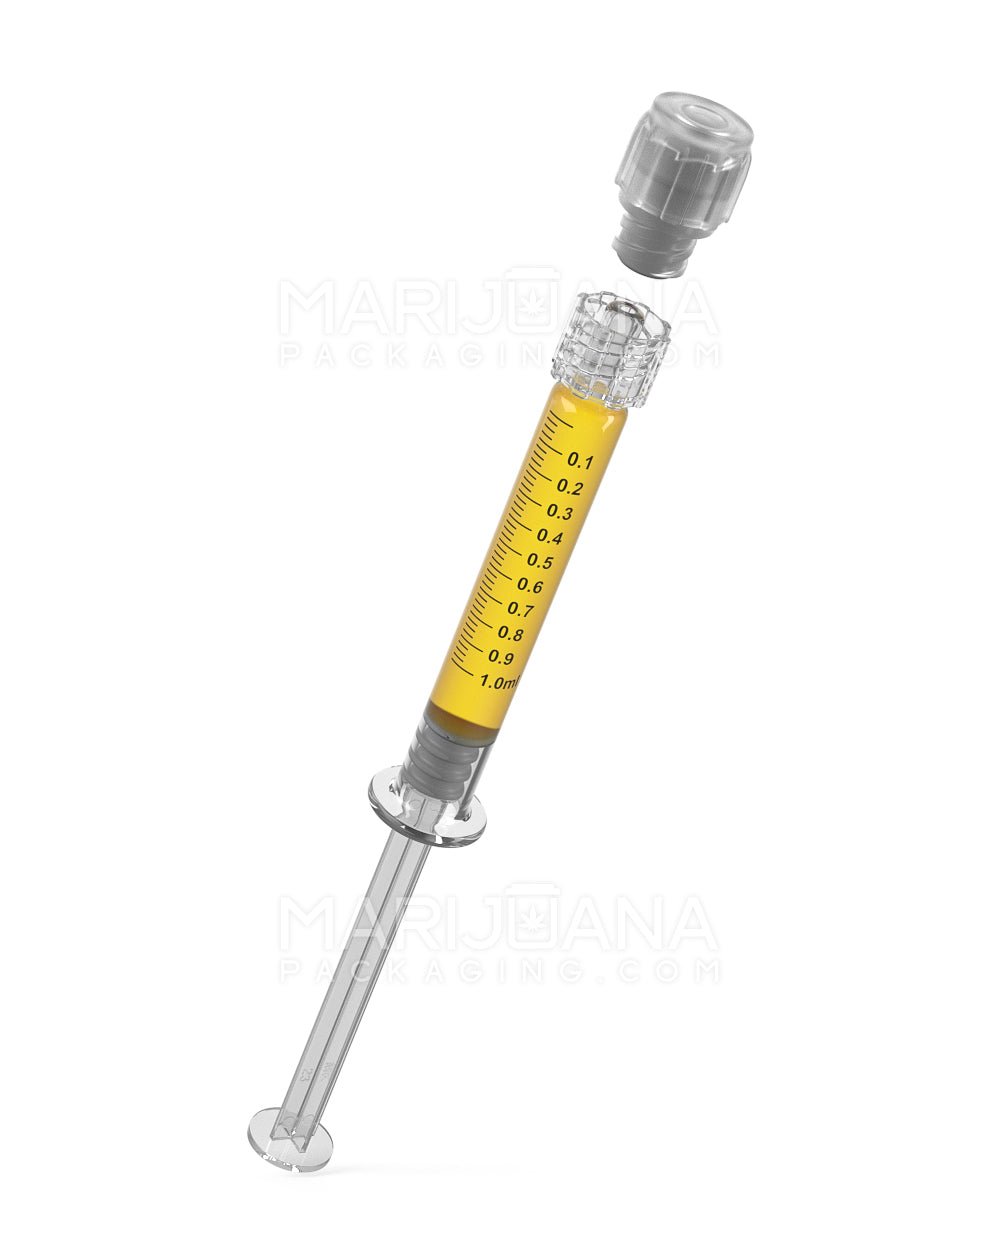 Child Resistant & Luer Lock | Long Glass Dab Applicator Syringes | 1mL - 0.1mL Increments - 100 Count - 6